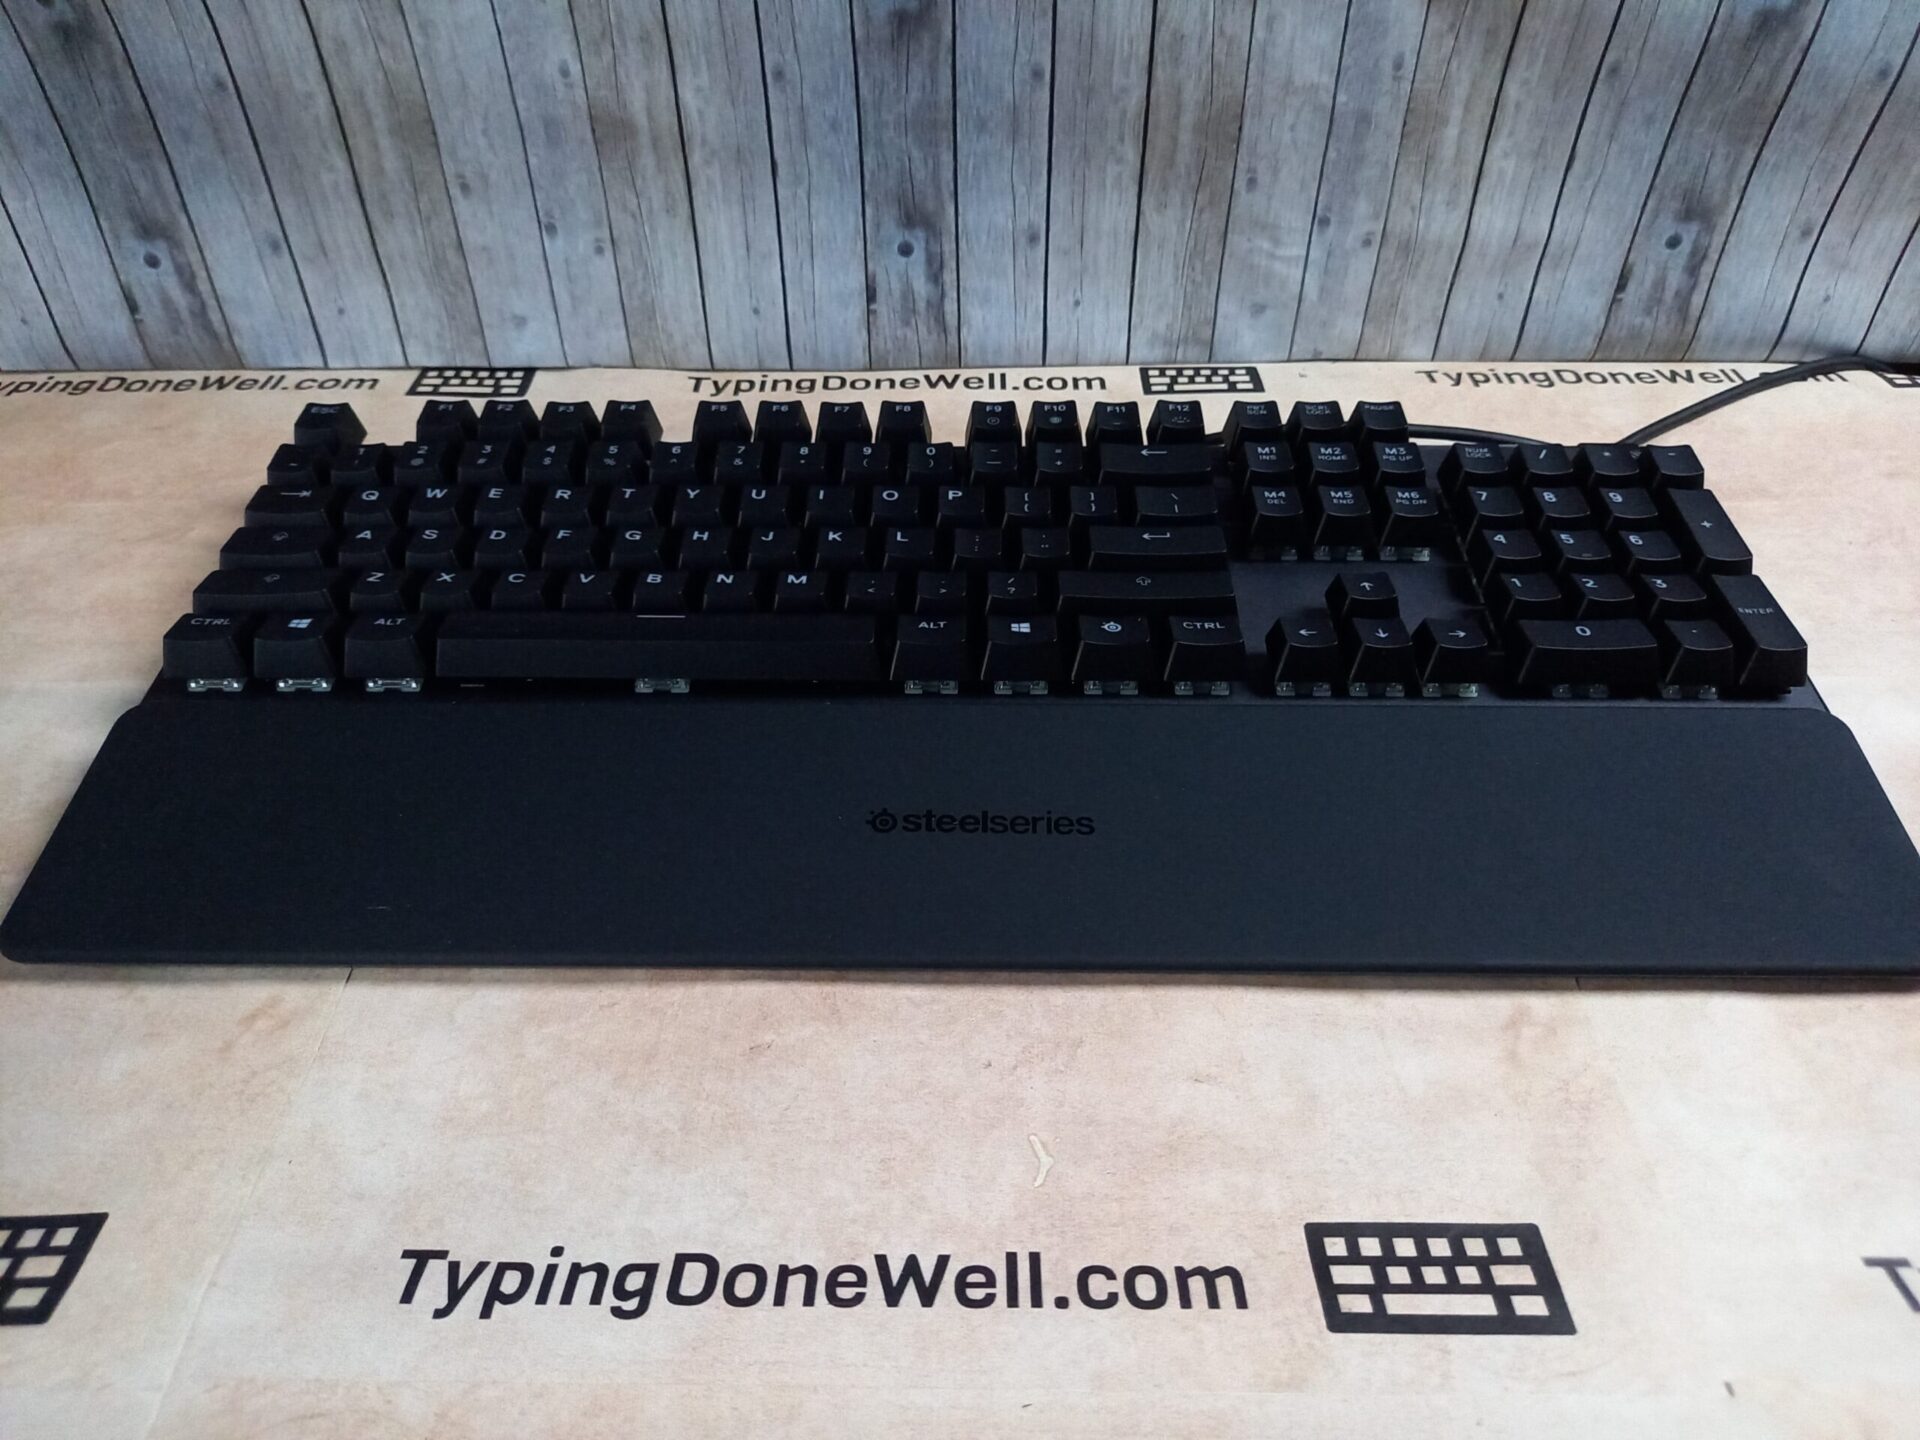 I tested it! SteelSeries Apex 5 keyboard review (with my own tests